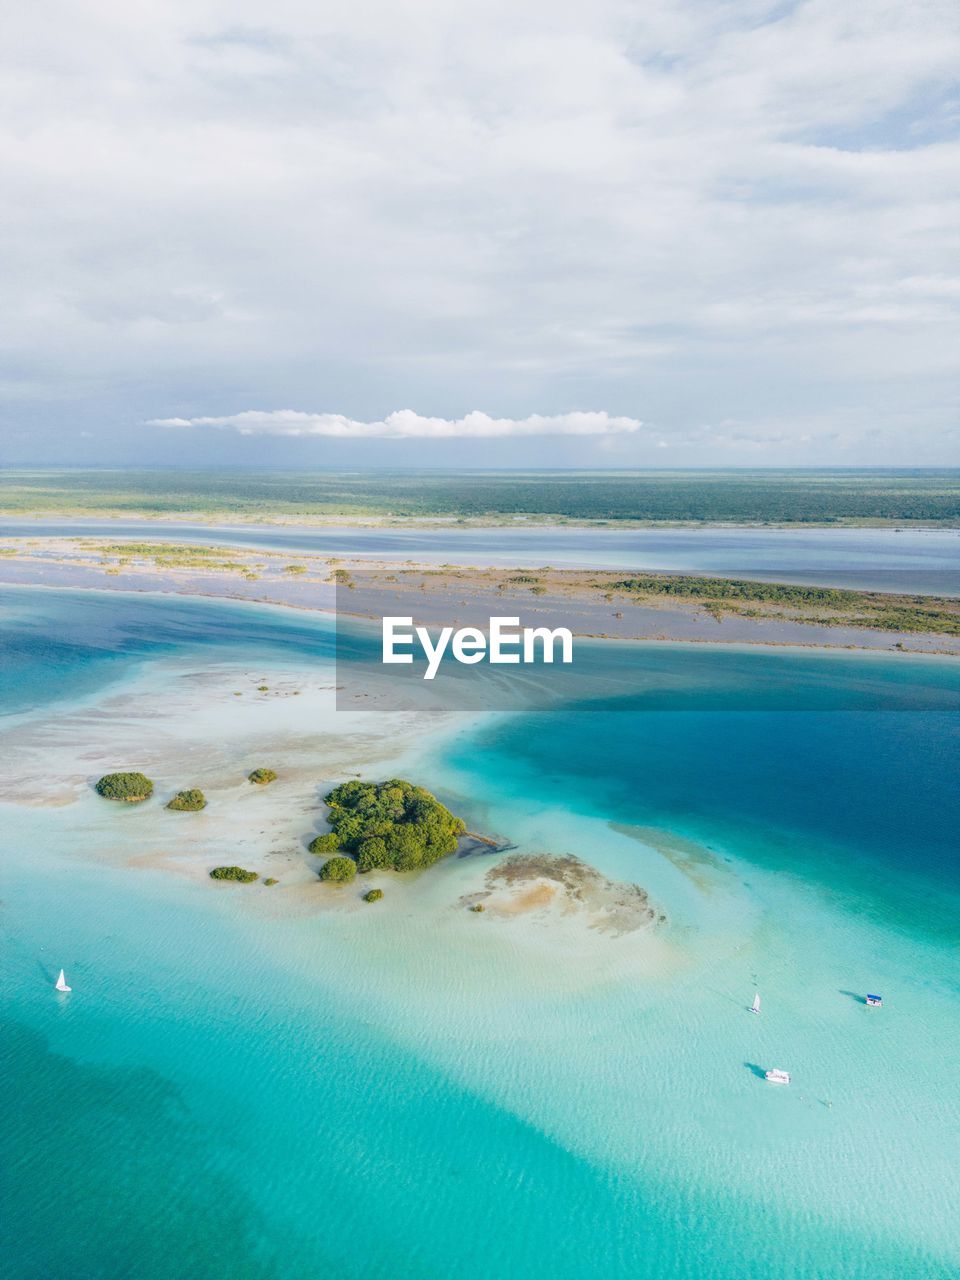 Drone view of a blue lagoon with some boats and an island